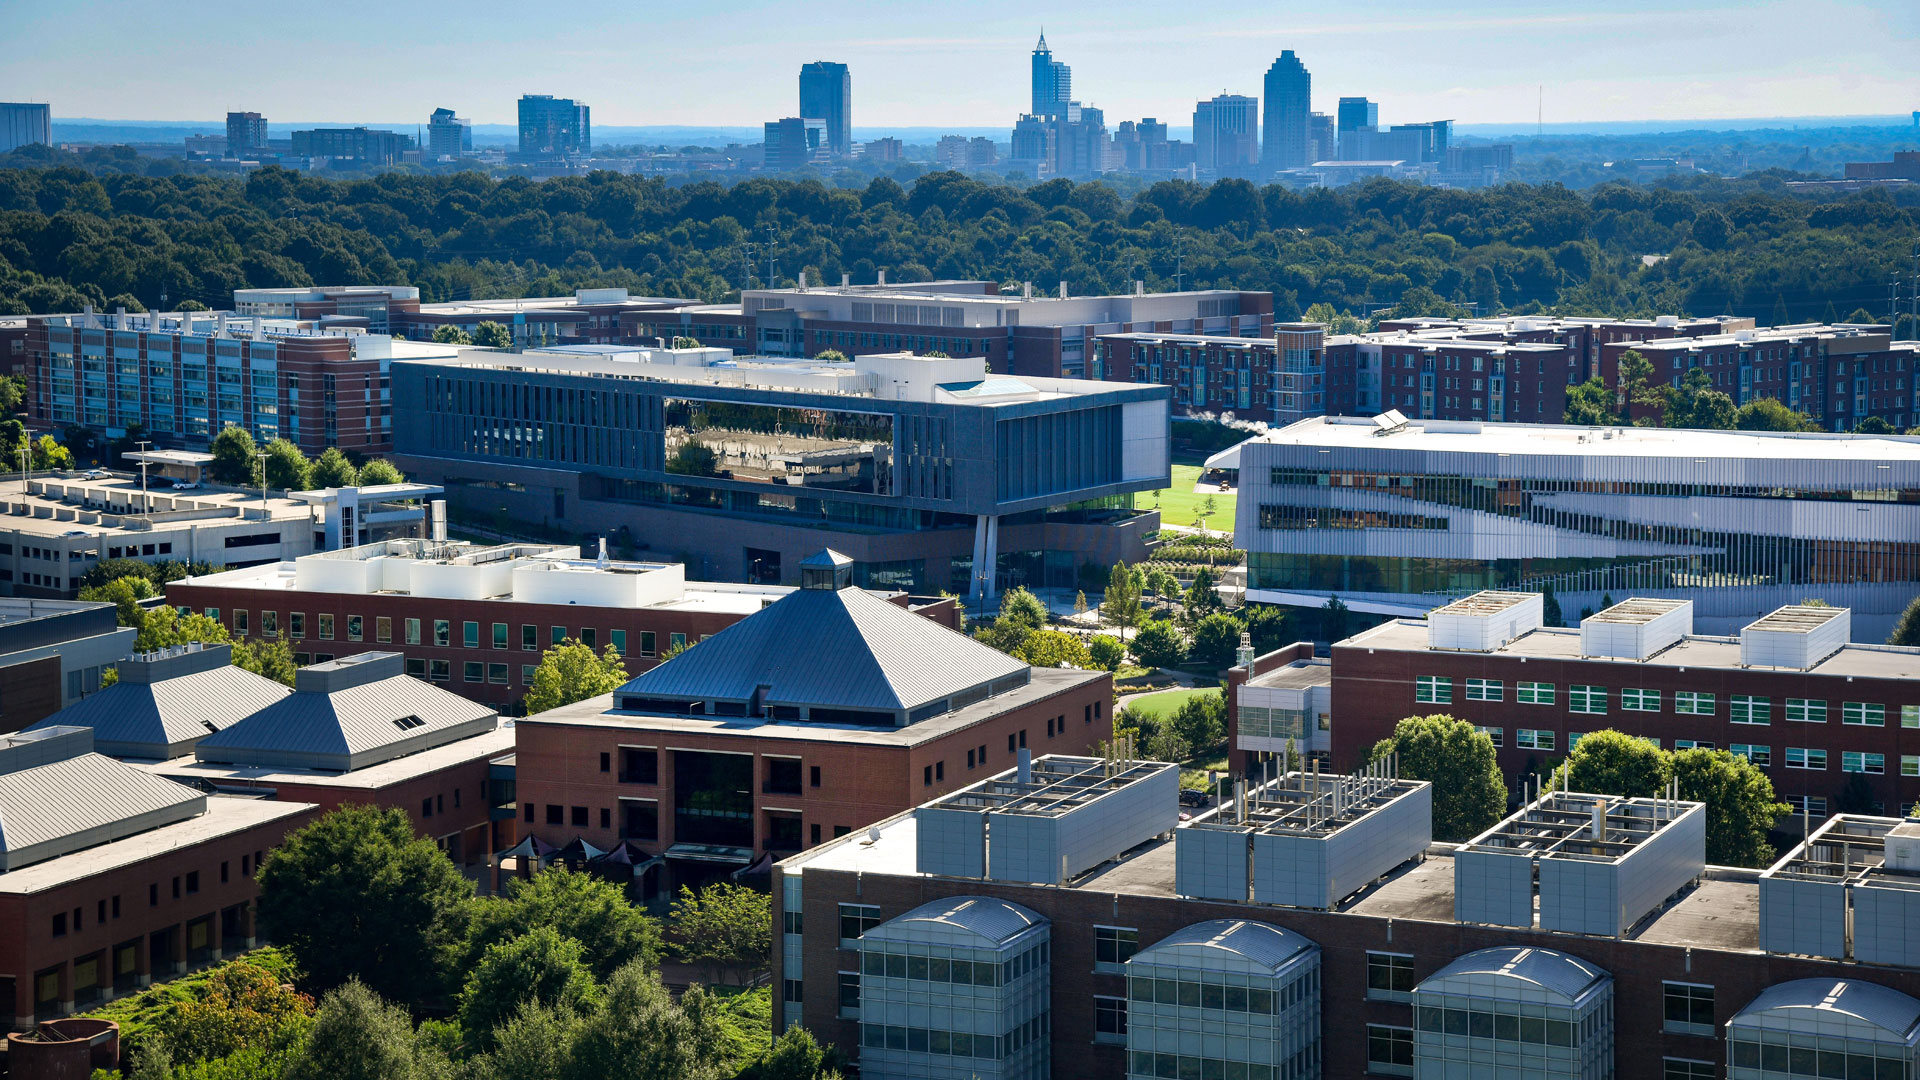 A photo highlighting the many buildings on Centennial Campus, in relation to downtown Raleigh skyline.